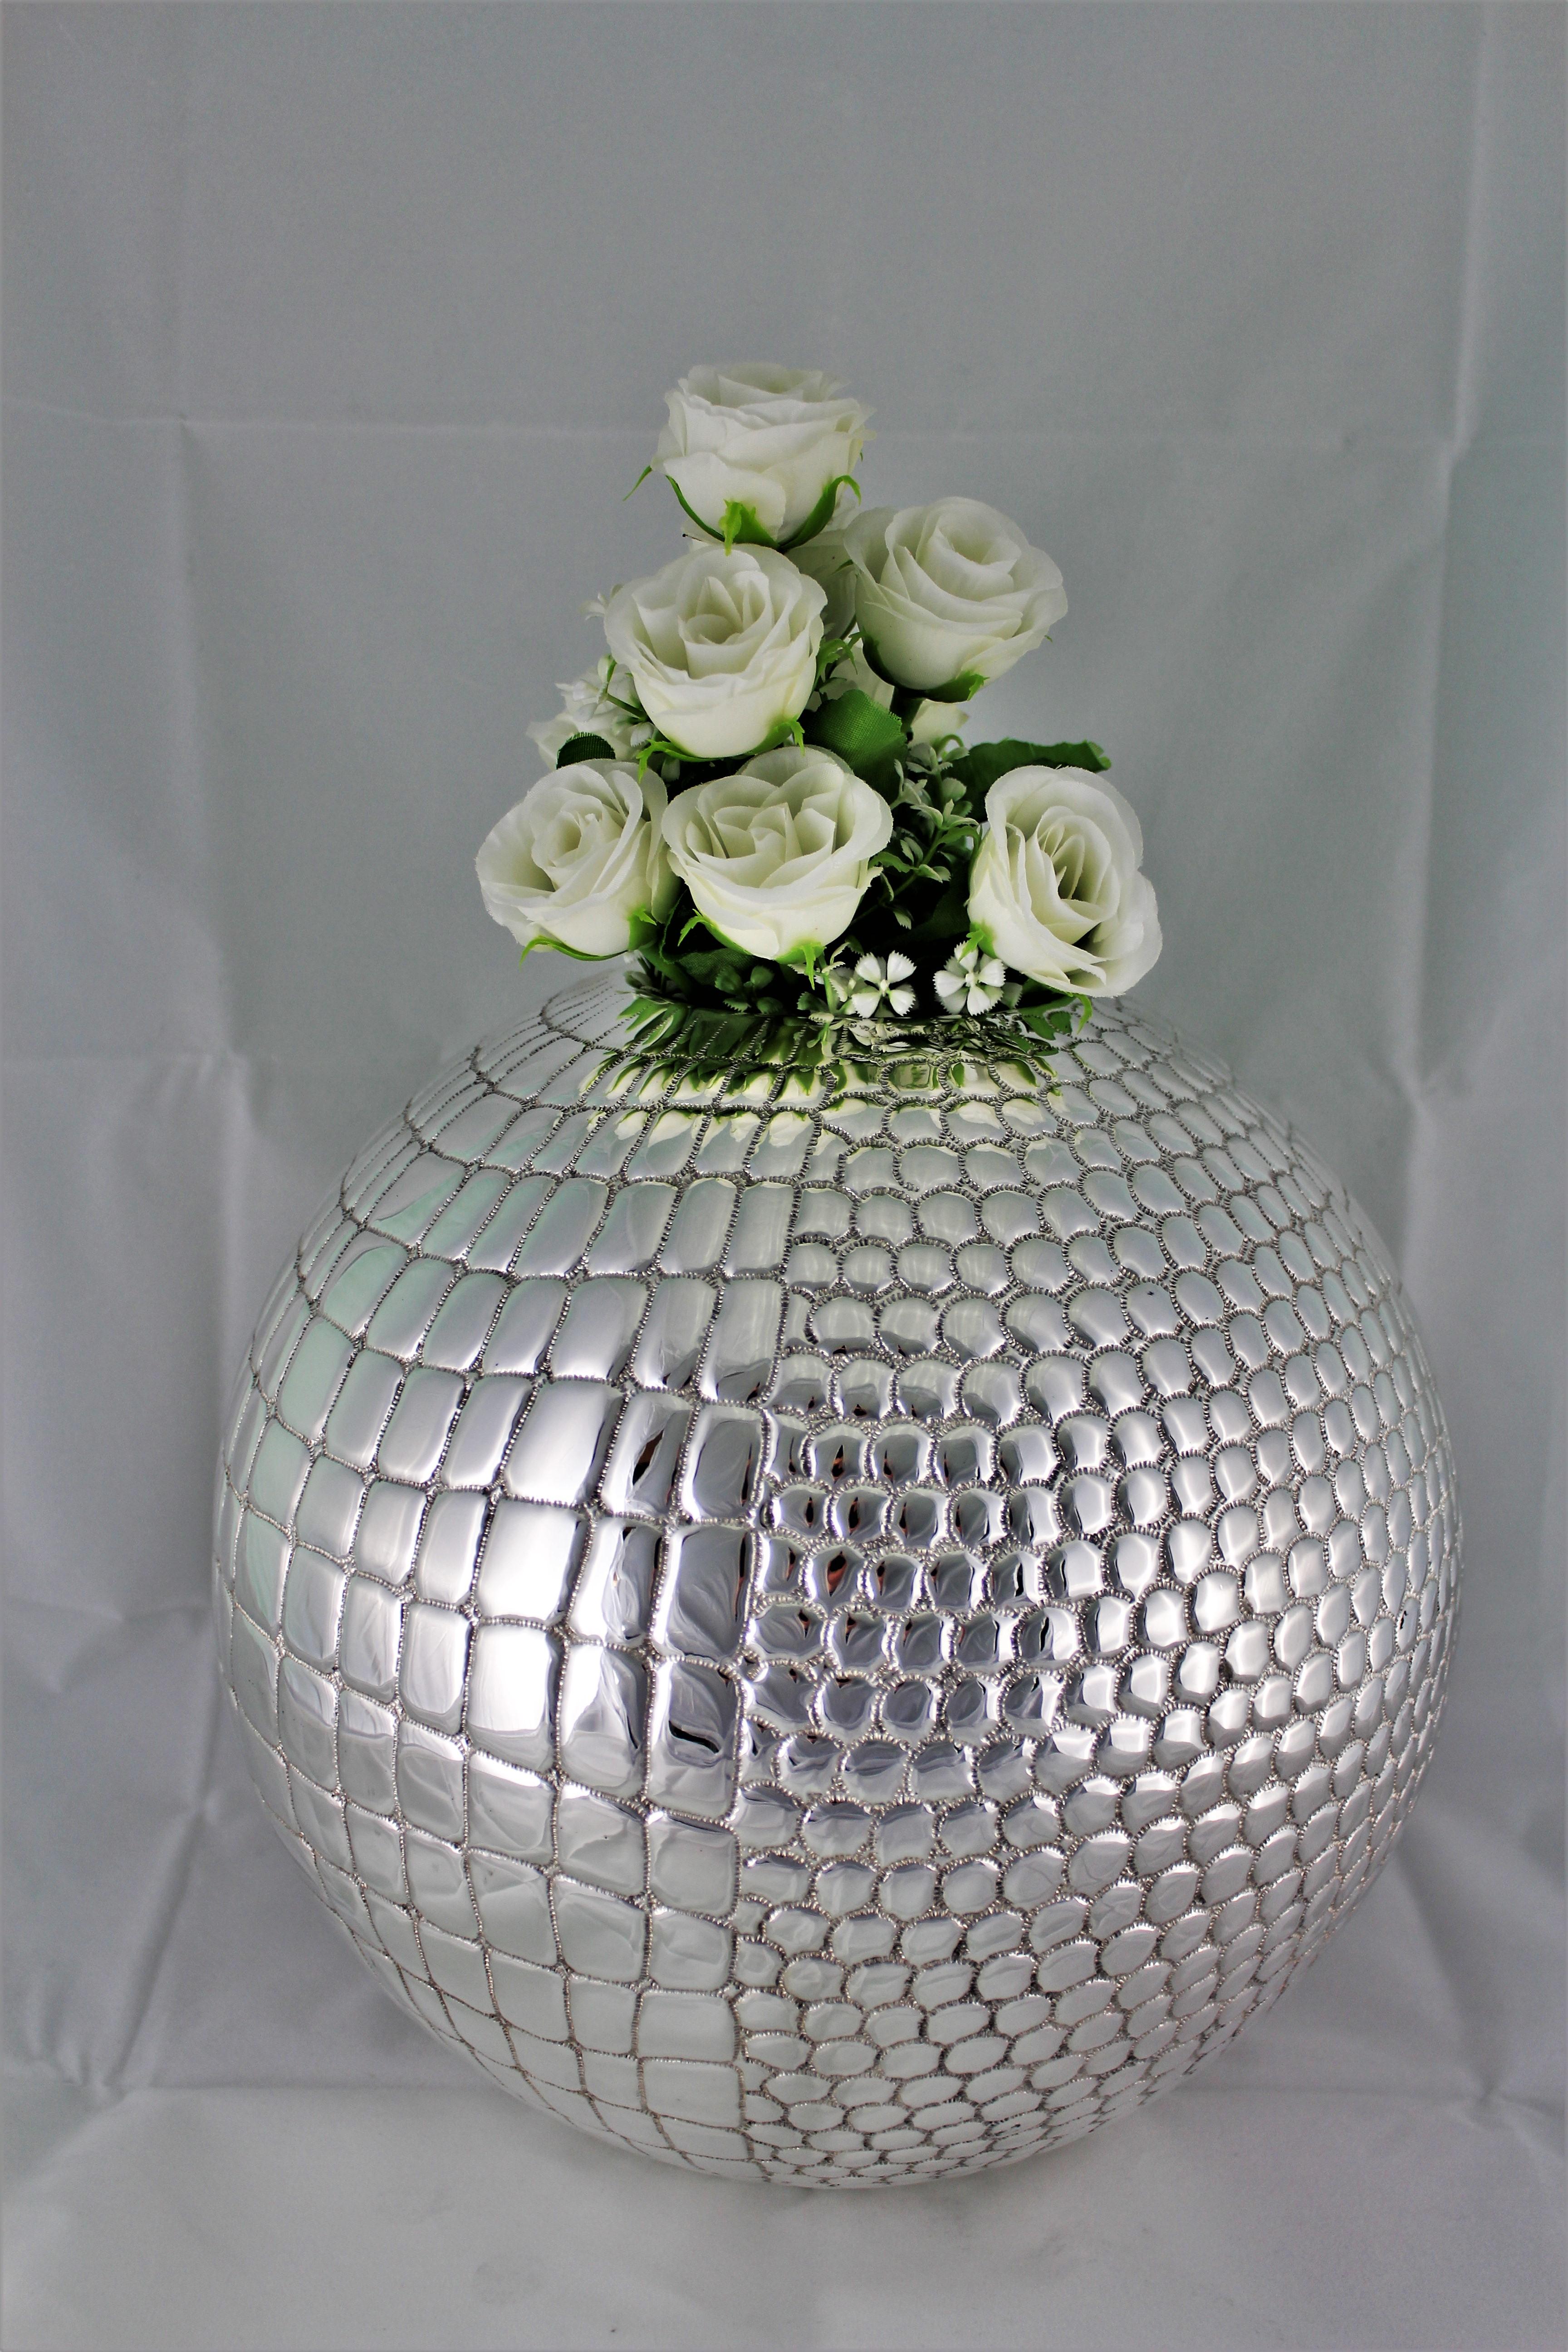 Italian 20th Century Engraved Silver Wine Cooler Flower Vase by P. Scavia, Italy, 1950s For Sale